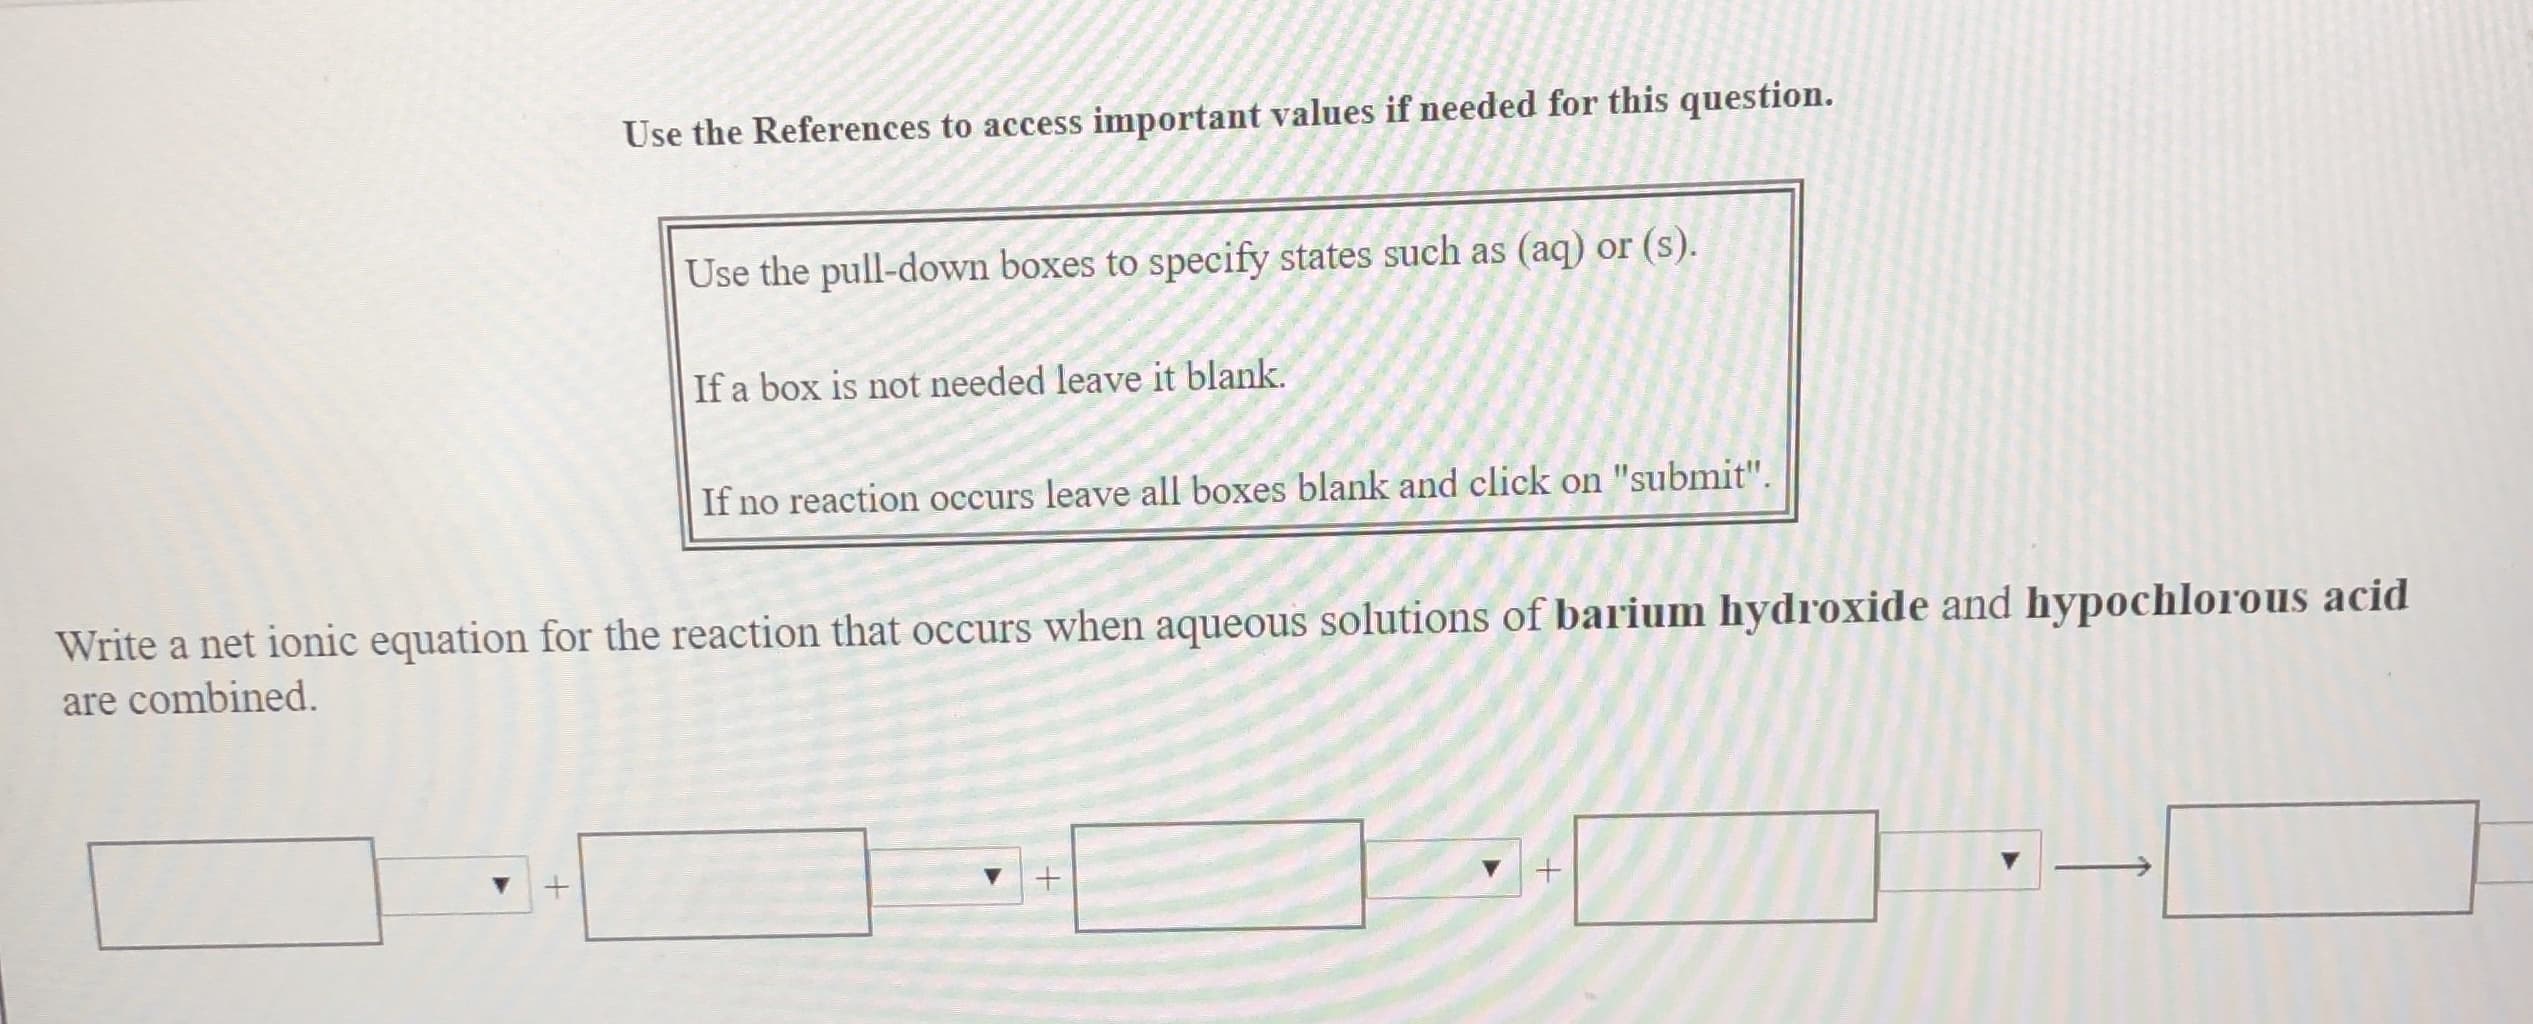 Use the References to access important values if needed for this question.
Use the pull-down boxes to specify states such as (aq) or (s).
If a box is not needed leave it blank.
If
no reaction occurs leave all boxes blank and click on "submit"
Write a net ionic equation for the reaction that occurs when aqueous solutions of barium hydroxide and hypochlorous acid
are combined
+
+
